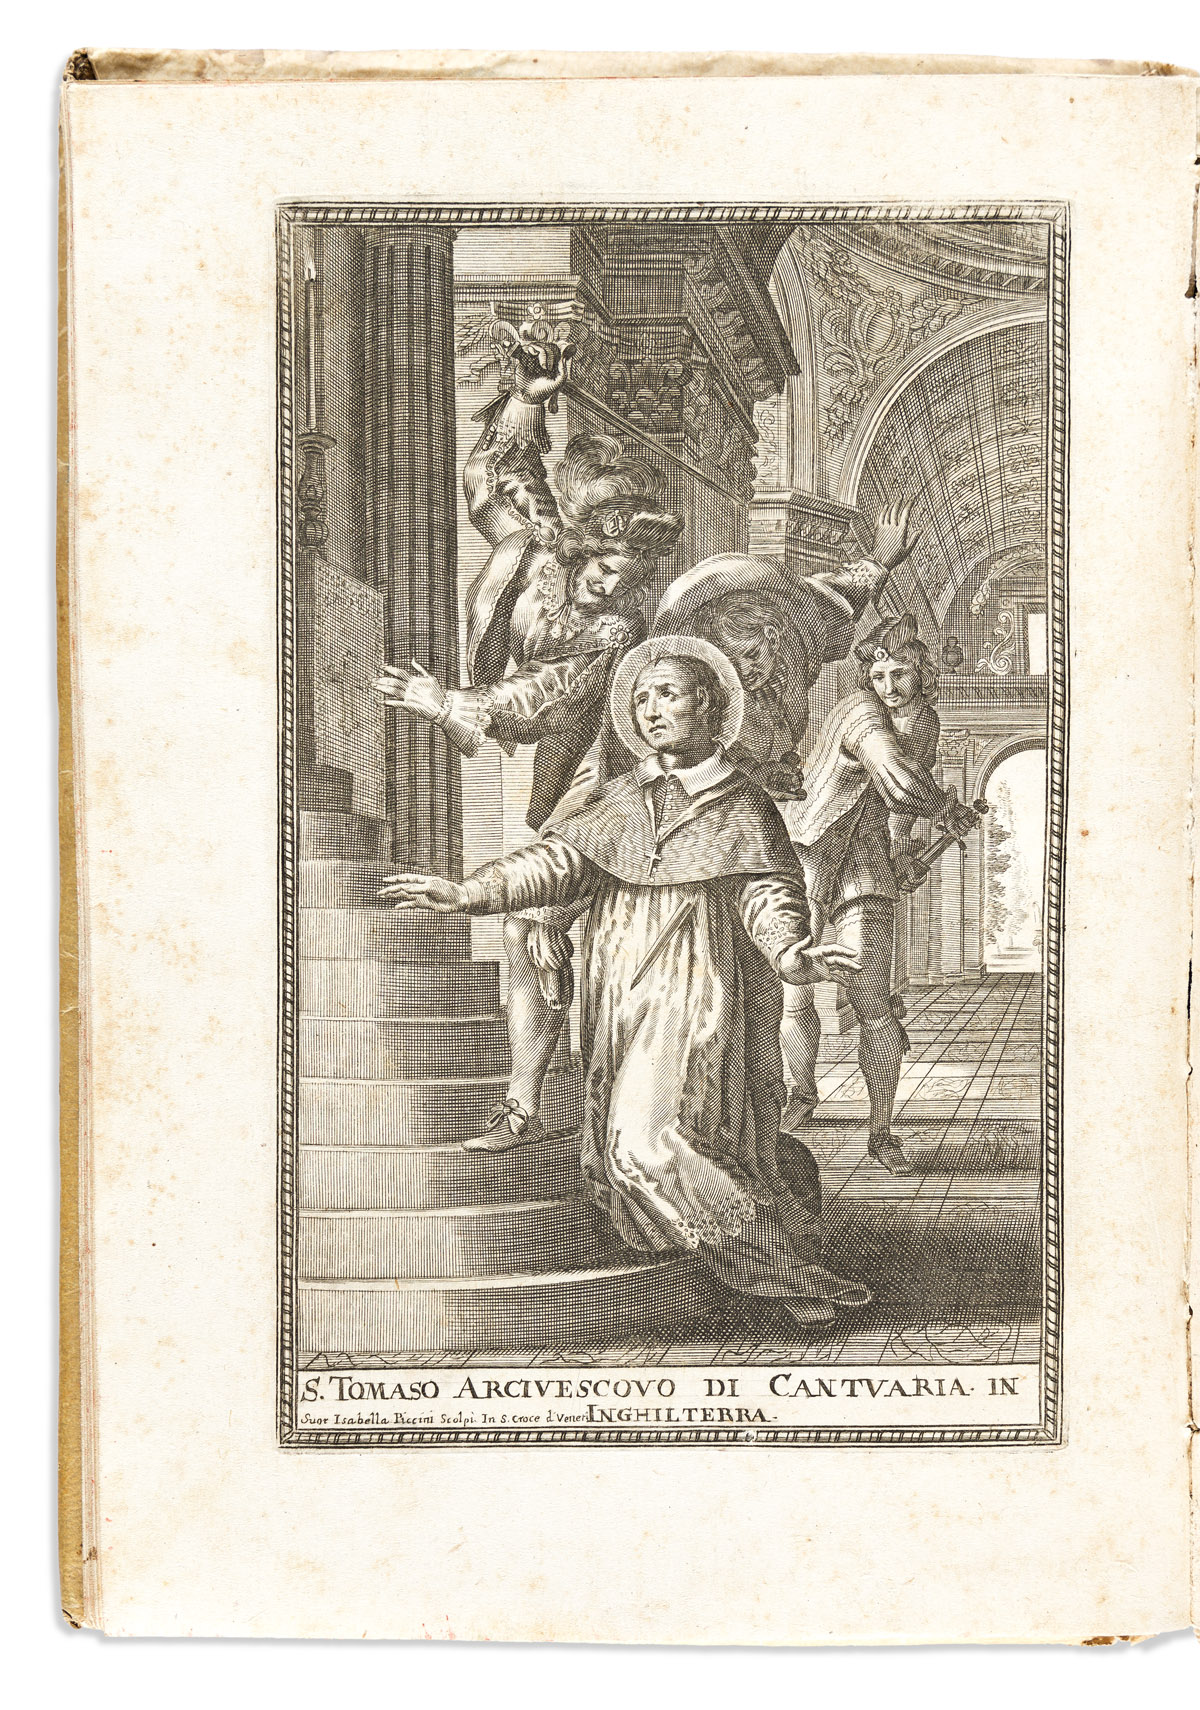 Piccini, Isabella [aka Elisabetta] (1644-1734) Four Early Books with her Engravings, 1663-1712.